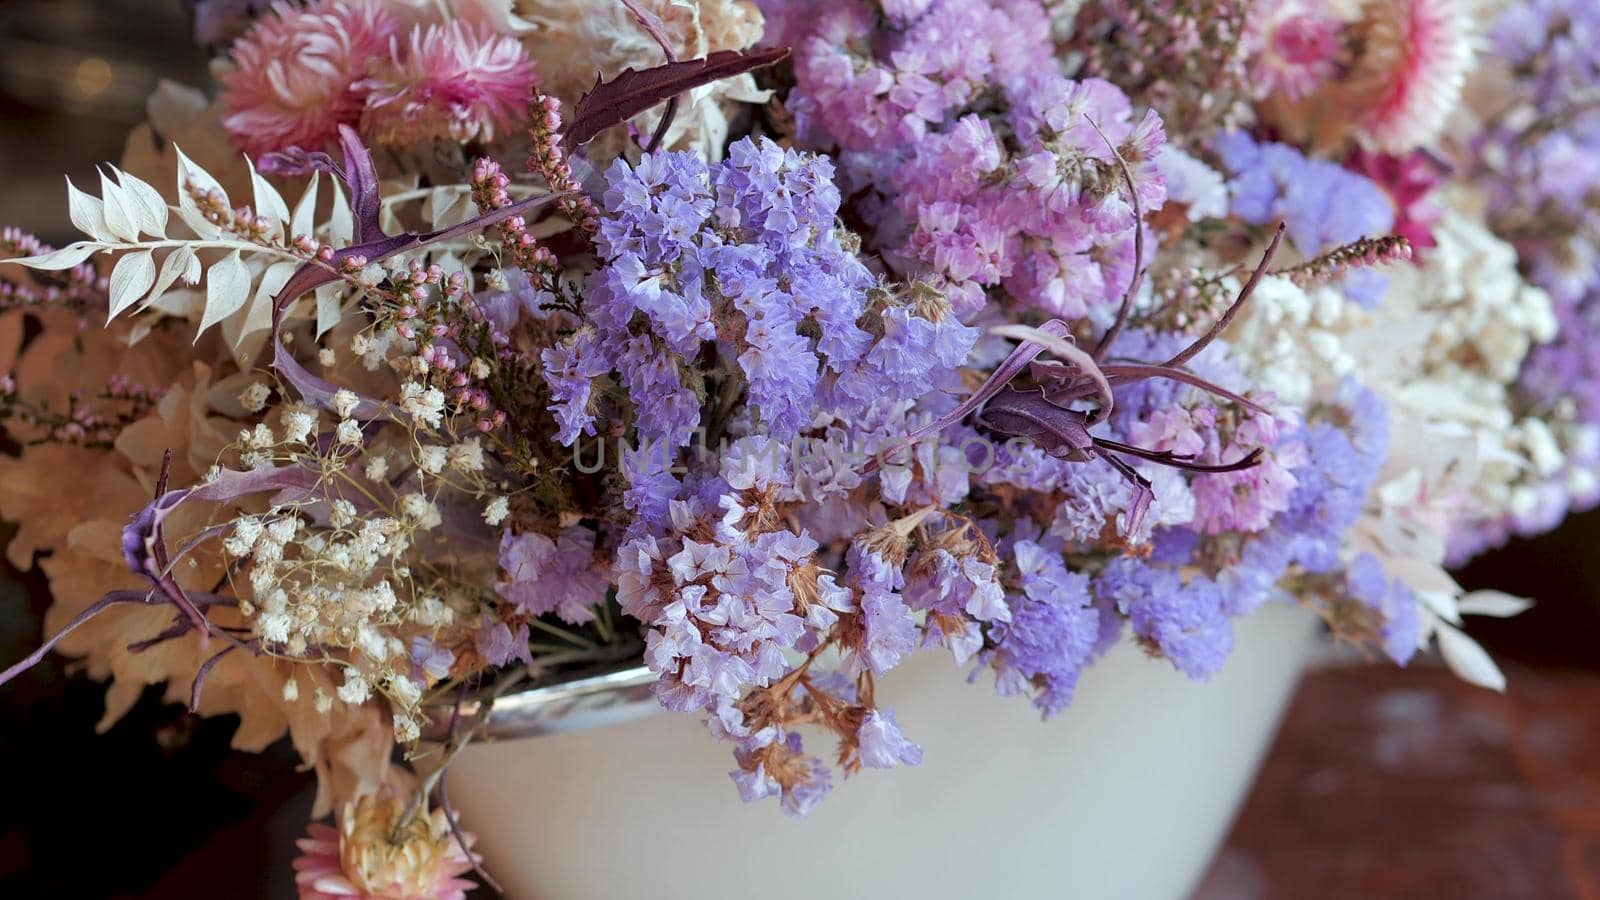 Bouquets with white, purple and violet dried flowers and leaves for sale in flower shop. by apavlin